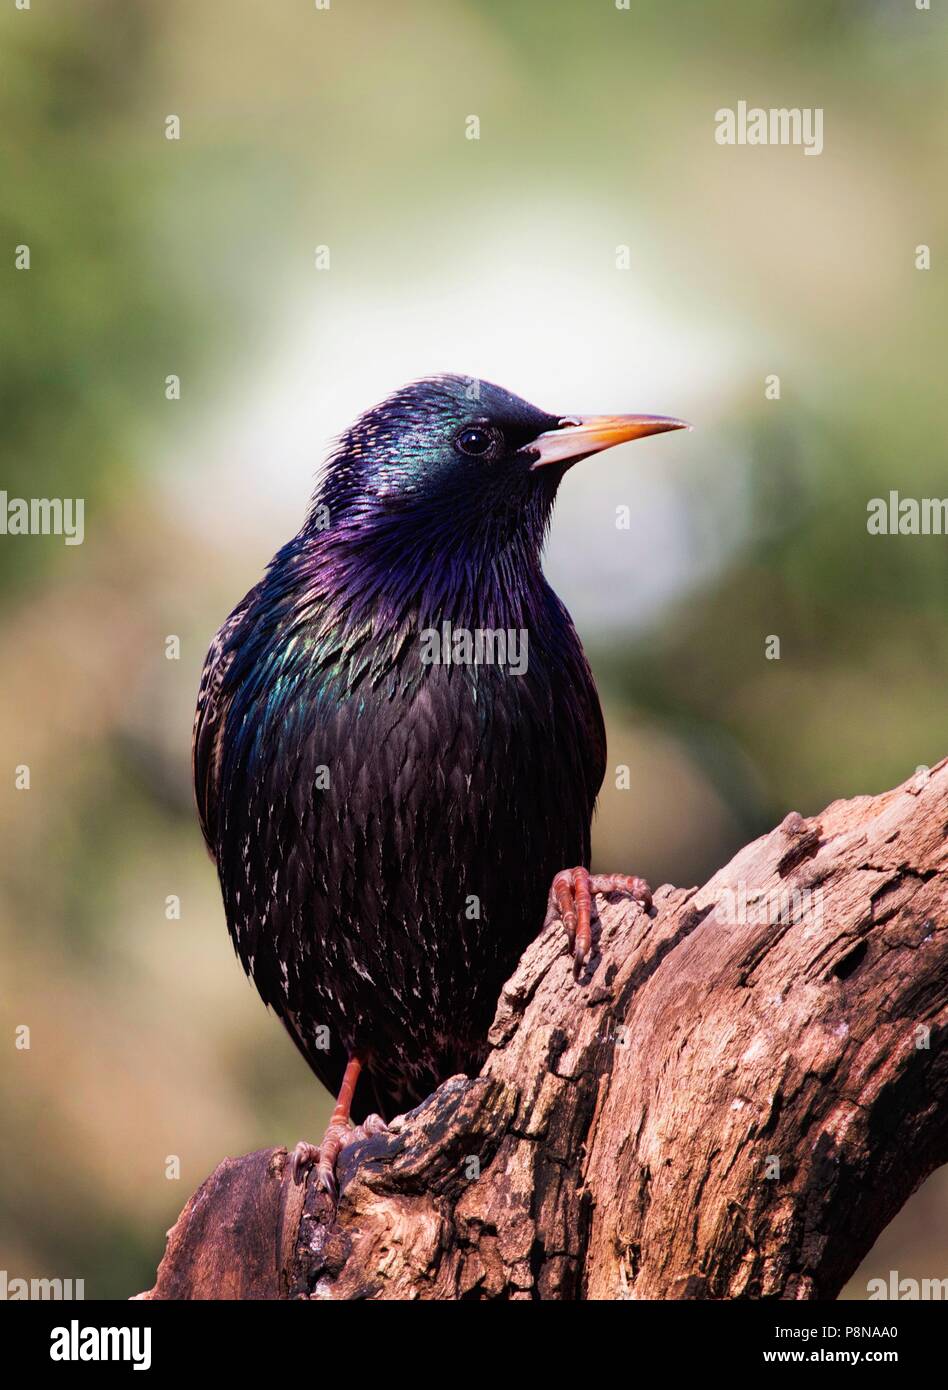 A European starling perched on a dead log with soft focus background. Stock Photo